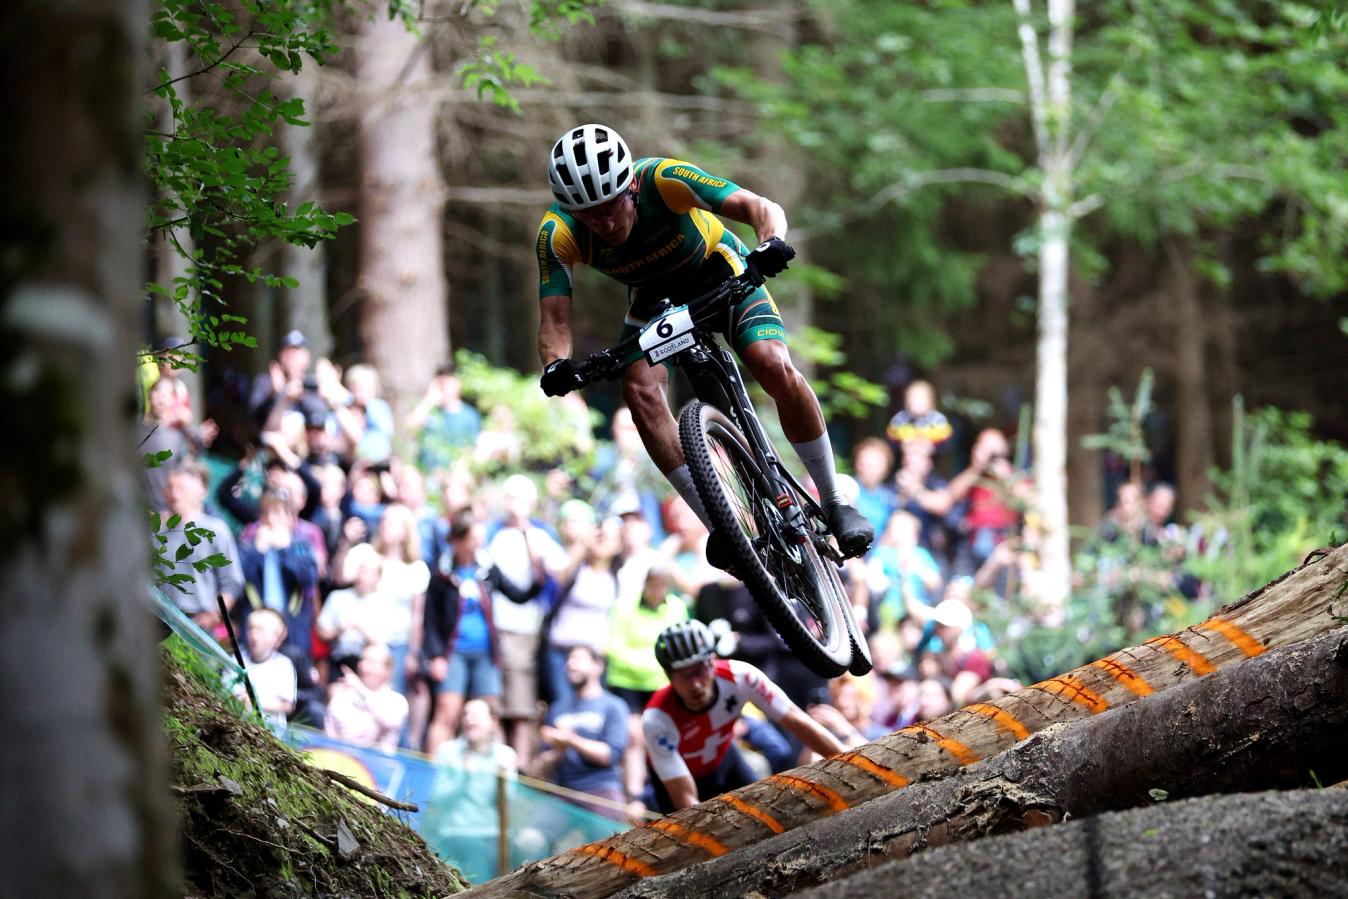 Alan Hatherly on his Cannondale Scalpel at the World Championships